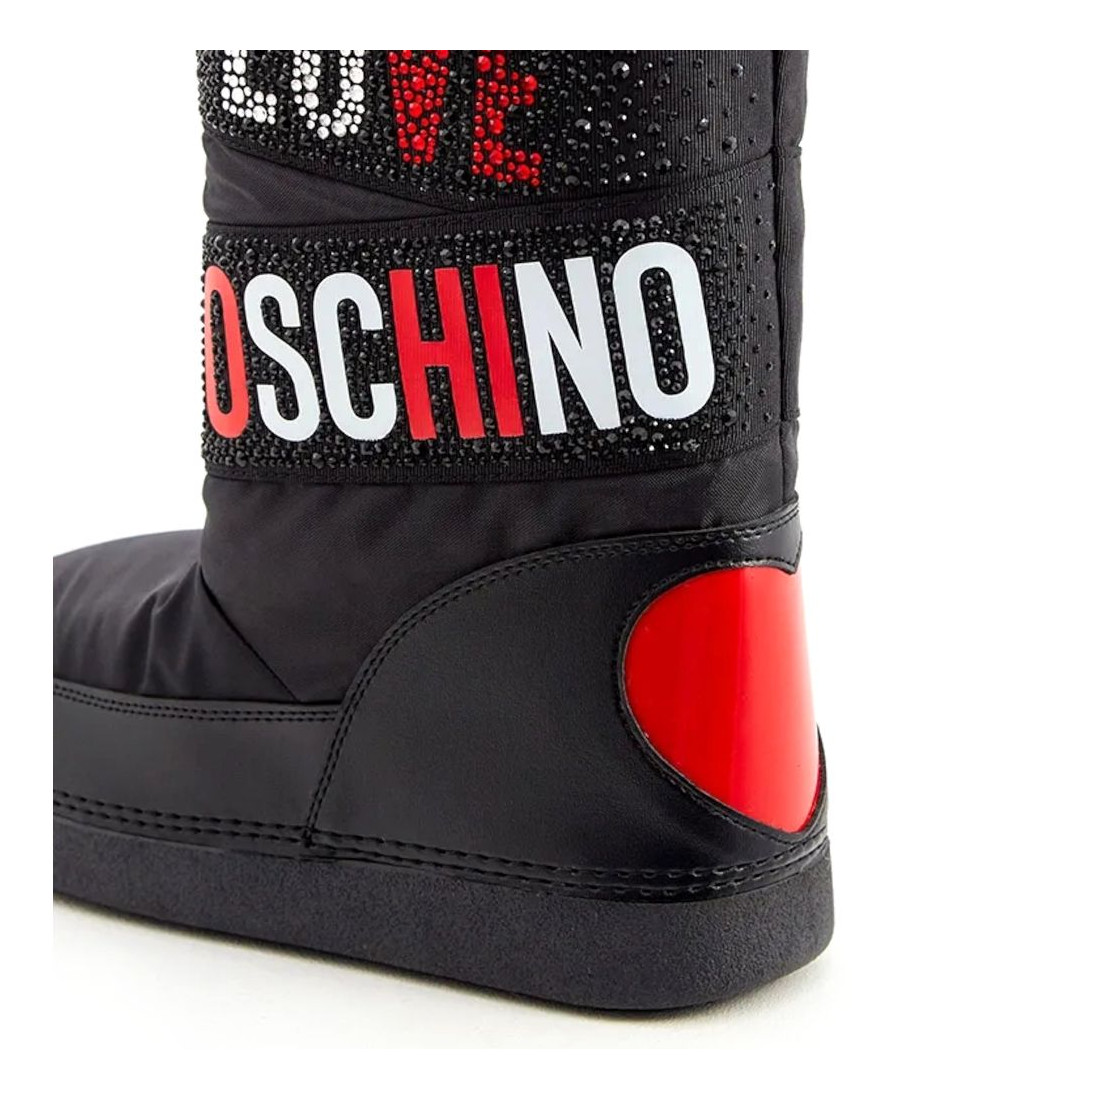 love moschino boots snow